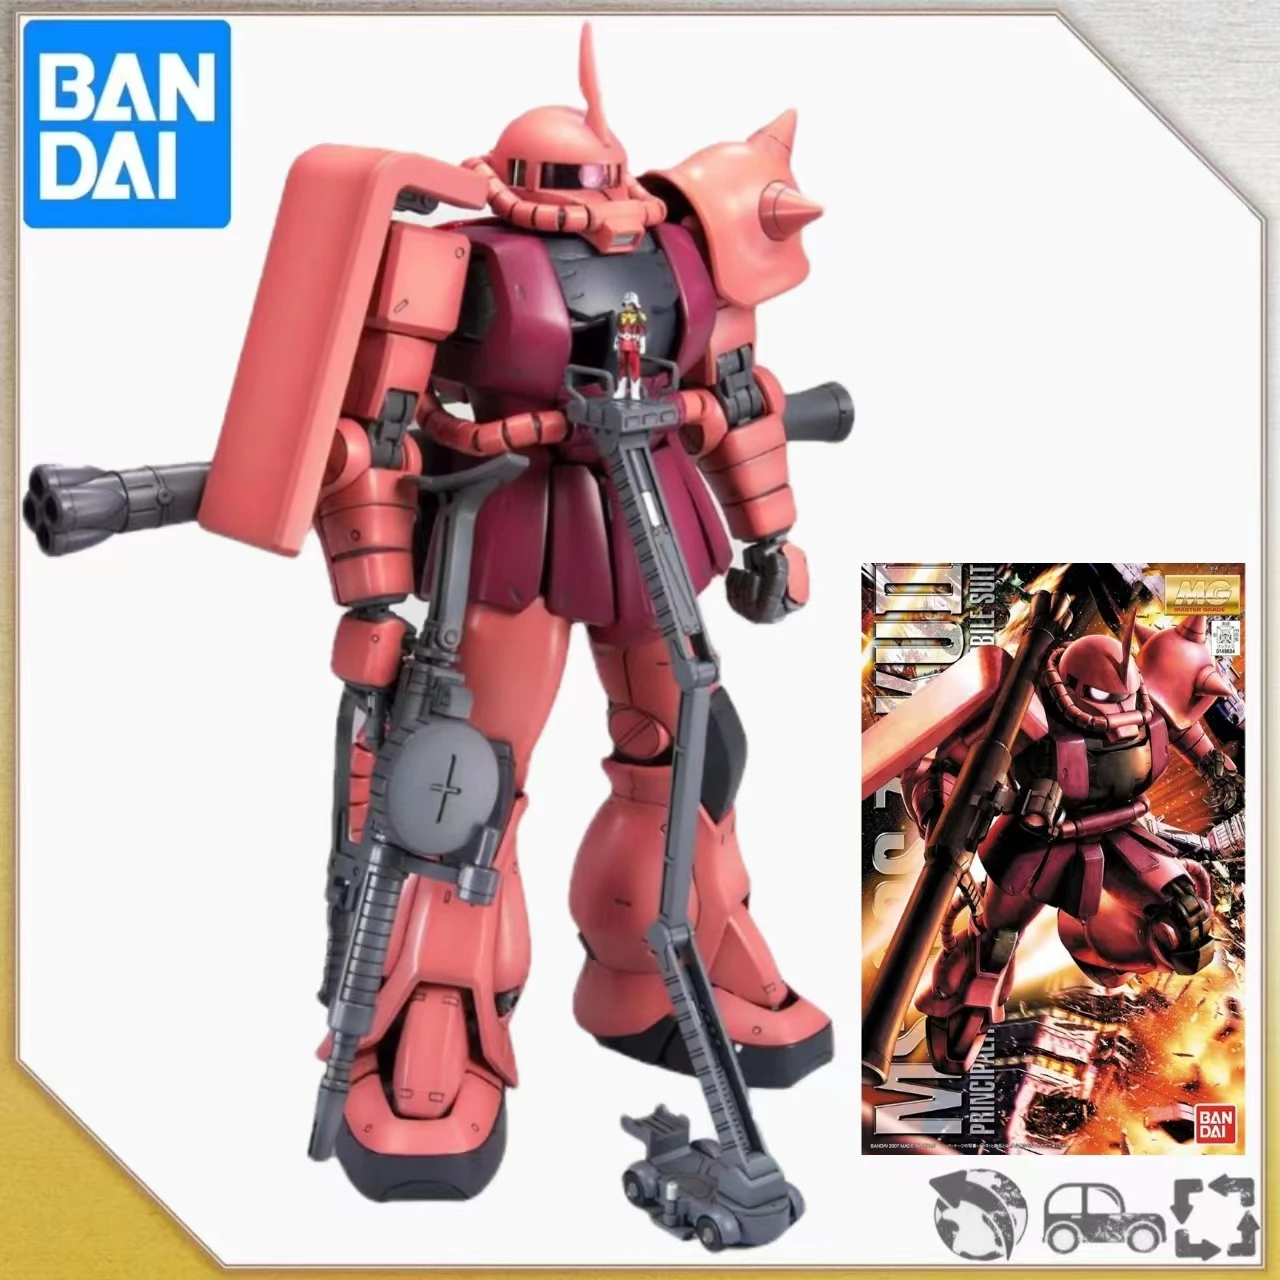 

Bandai MG 1/100 Mobile Suit Gundam MS-06S-CA Char's Zaku VER.2.0 Assembly Plastic Model Kit Action Toy Figures Anime Collection